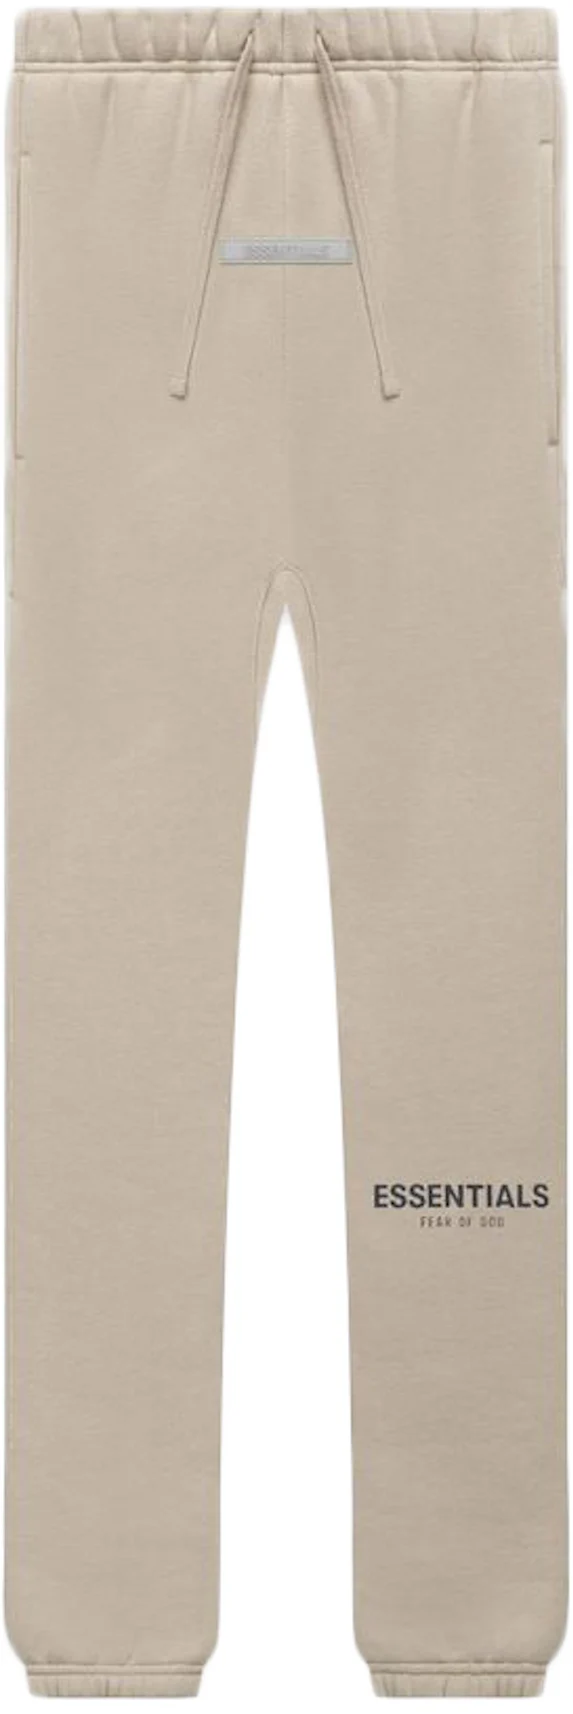 Fear of God Essentials Core Collection Kids Sweatpant String - FW21 ...